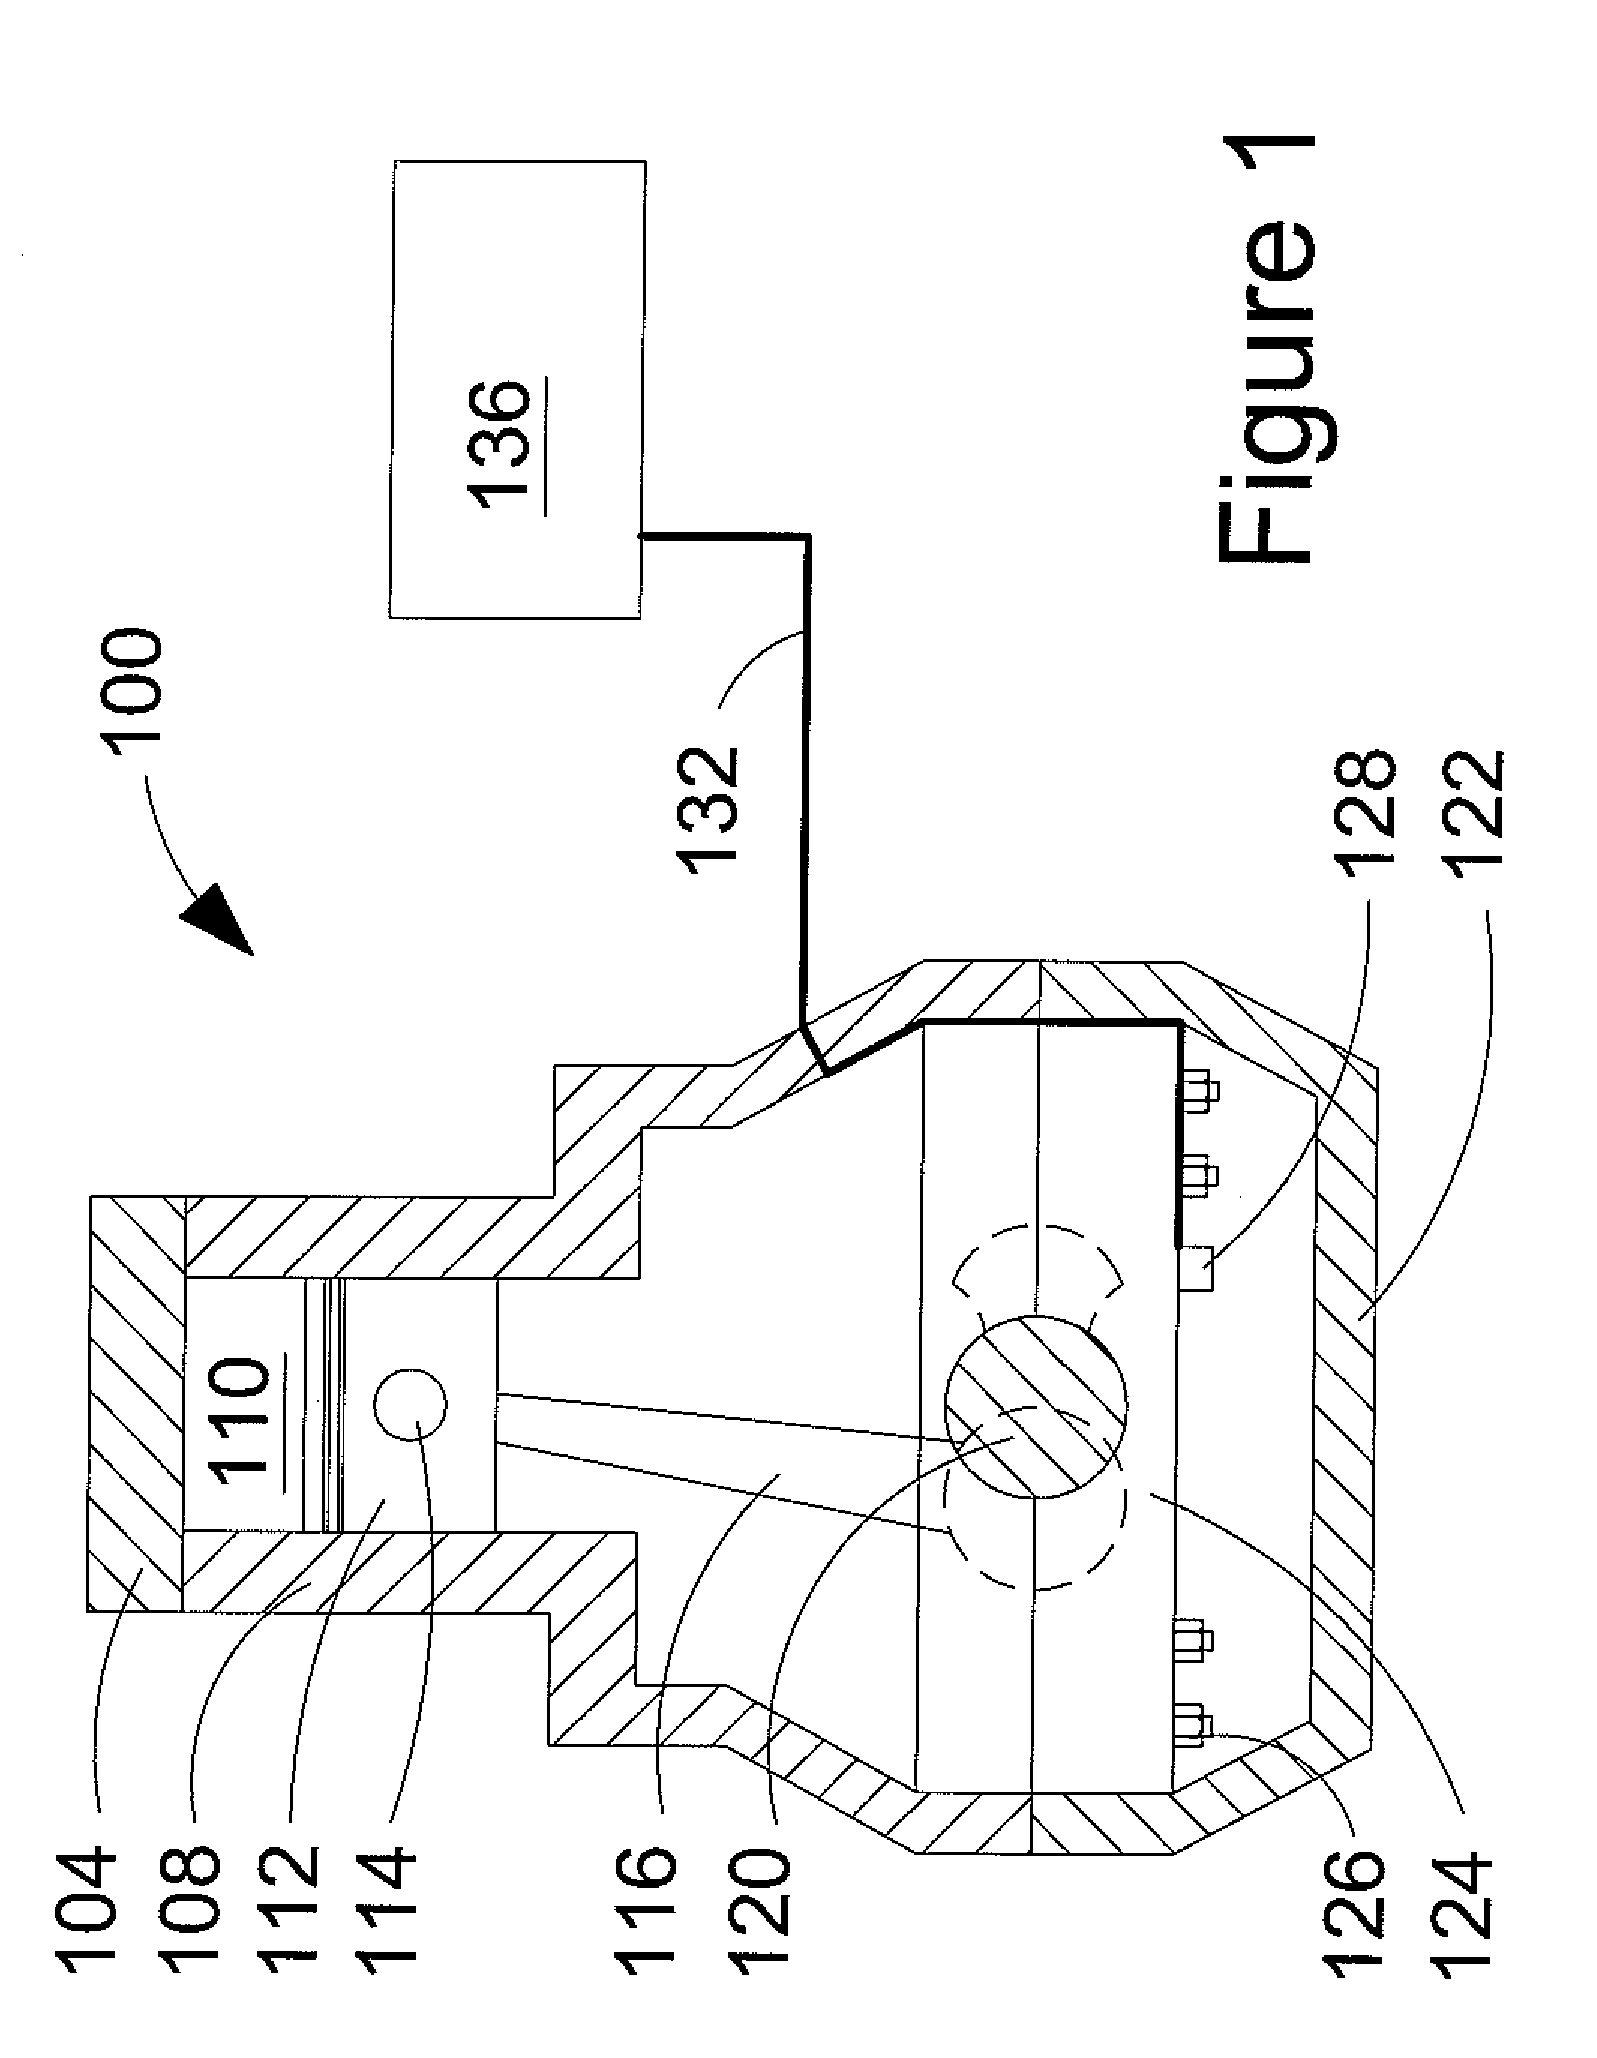 Method of mounting an accelerometer on an internal combustion engine and increasing signal-to-noise ratio